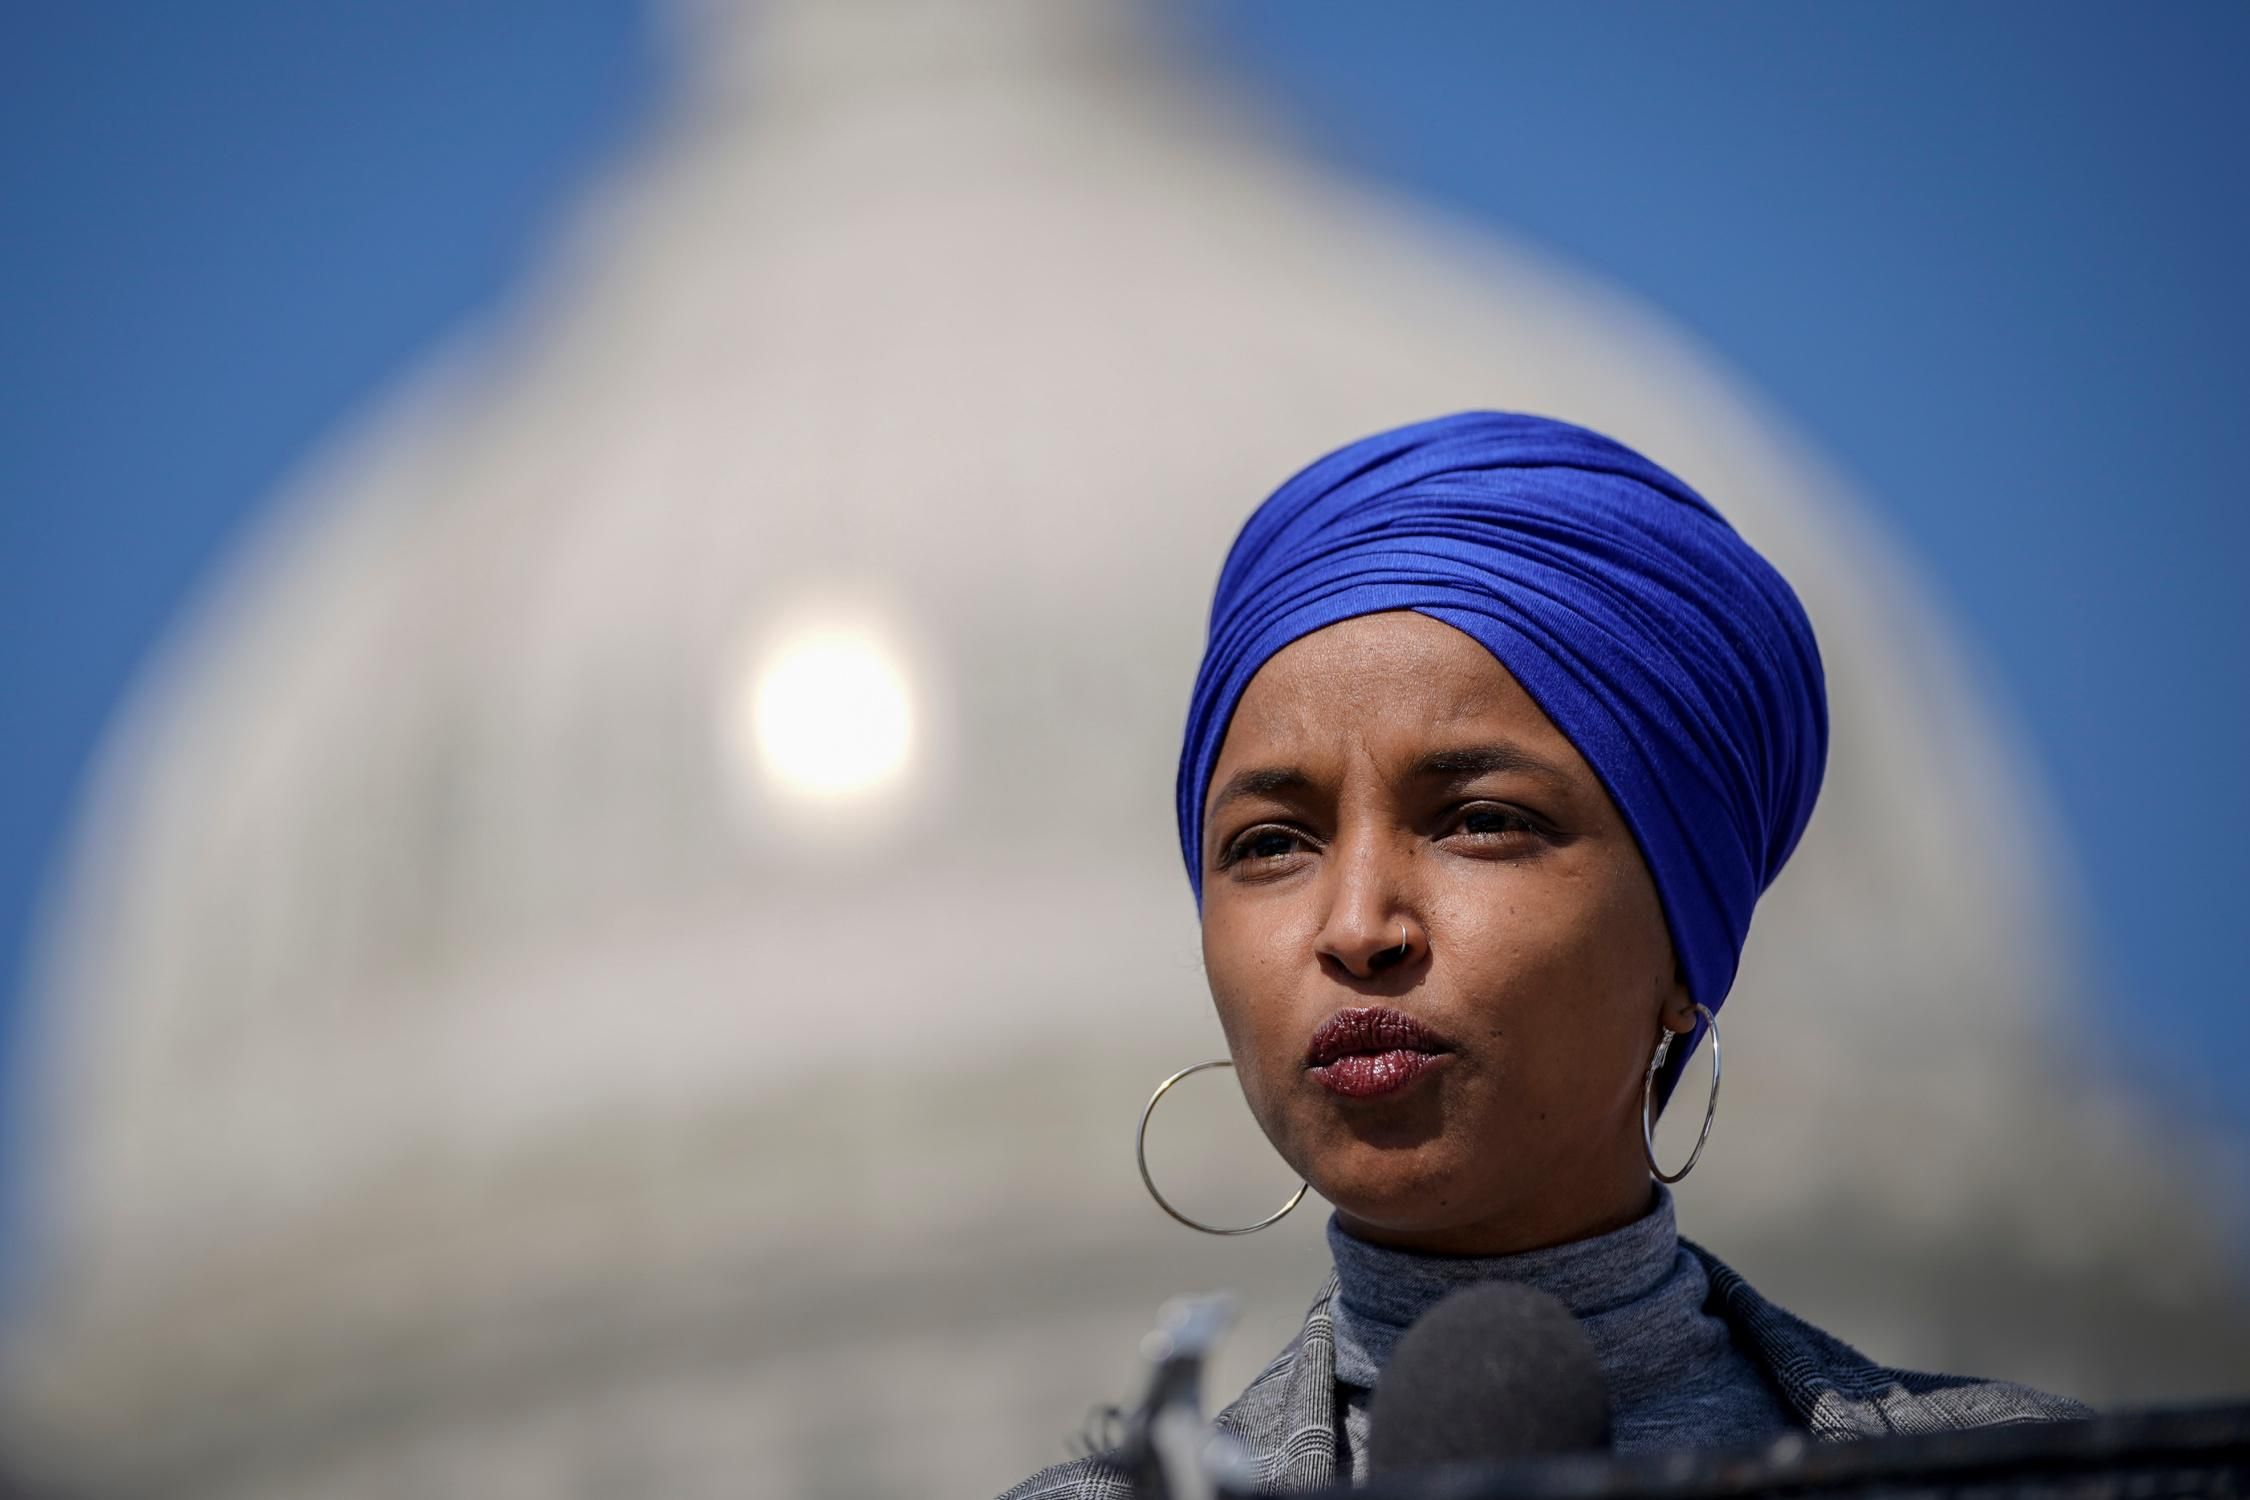 Rep. Ilhan Omar (D-Minn.) speaks during a news conference outside the U.S. Capitol on March 11, 2021 in Washington, D.C.